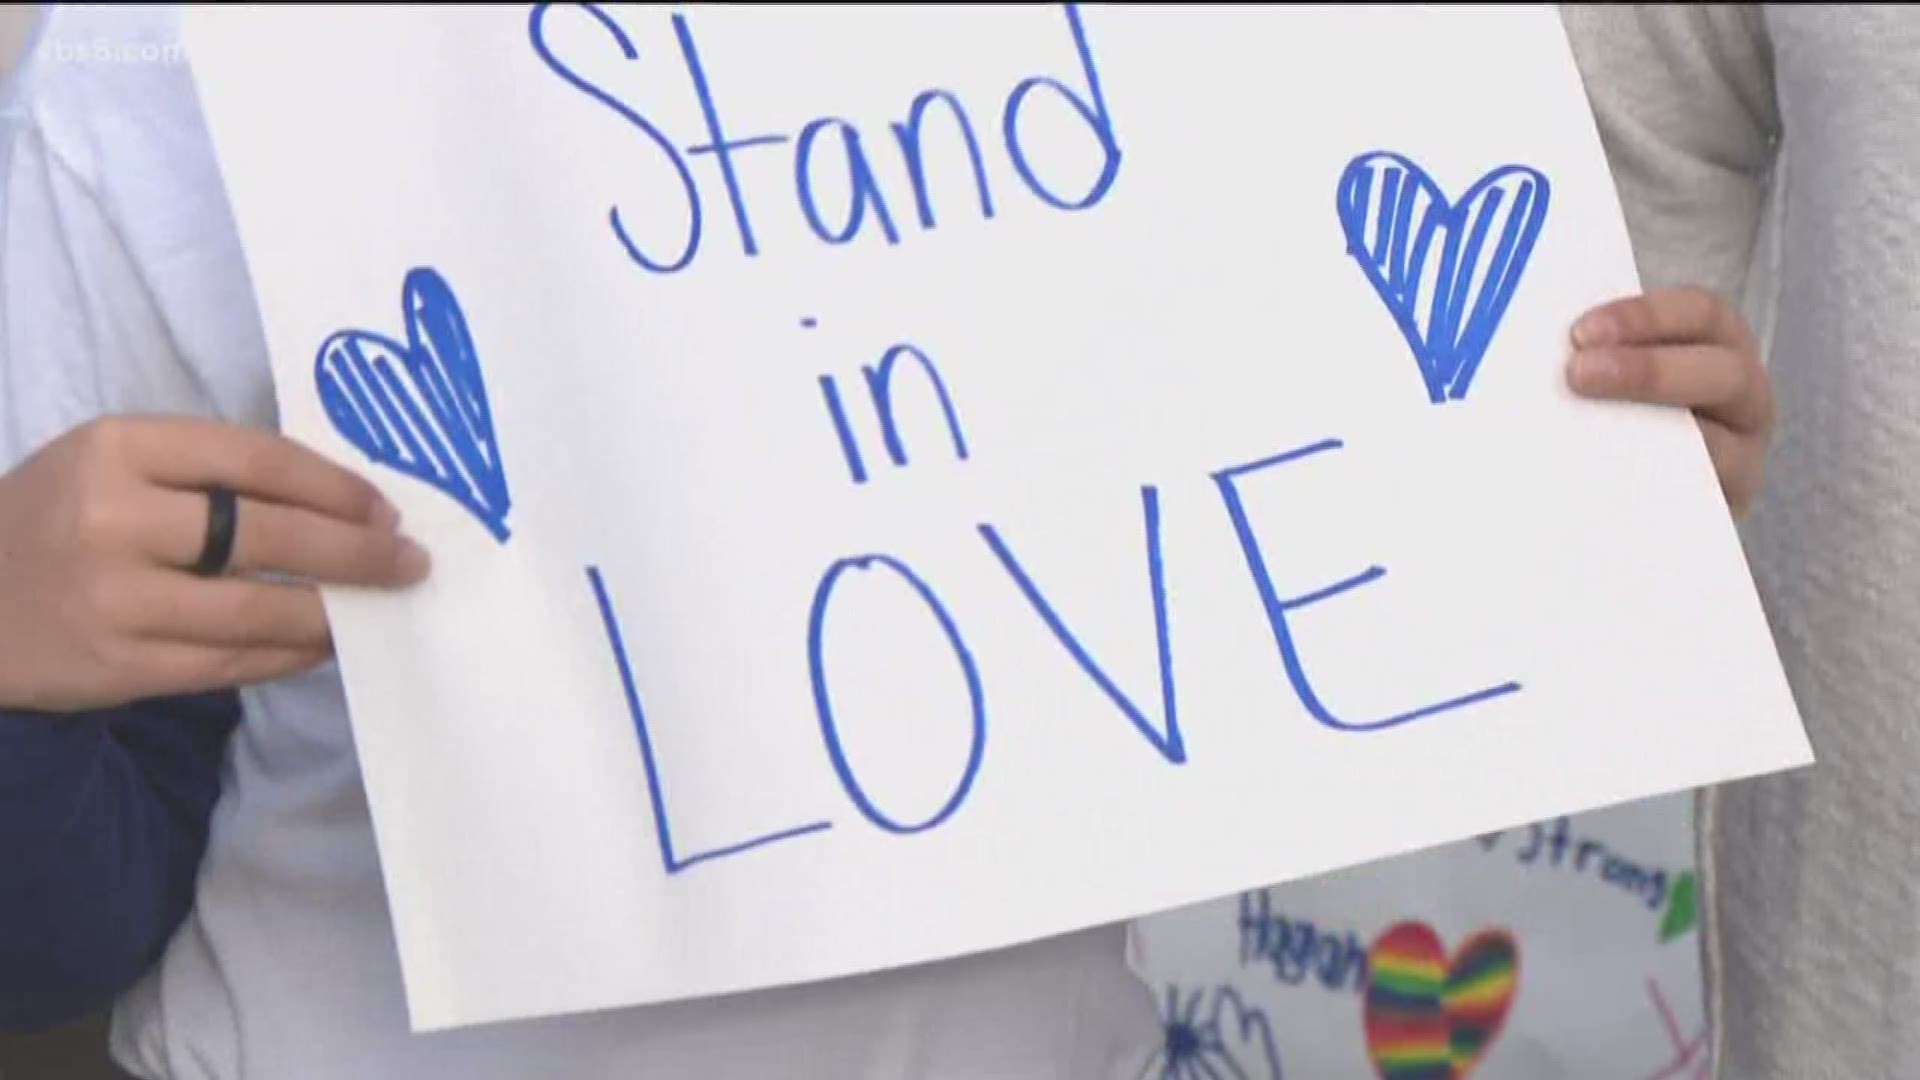 The vigil was organized by a group called Moms of Poway who lined the same street Friday in a show of support.